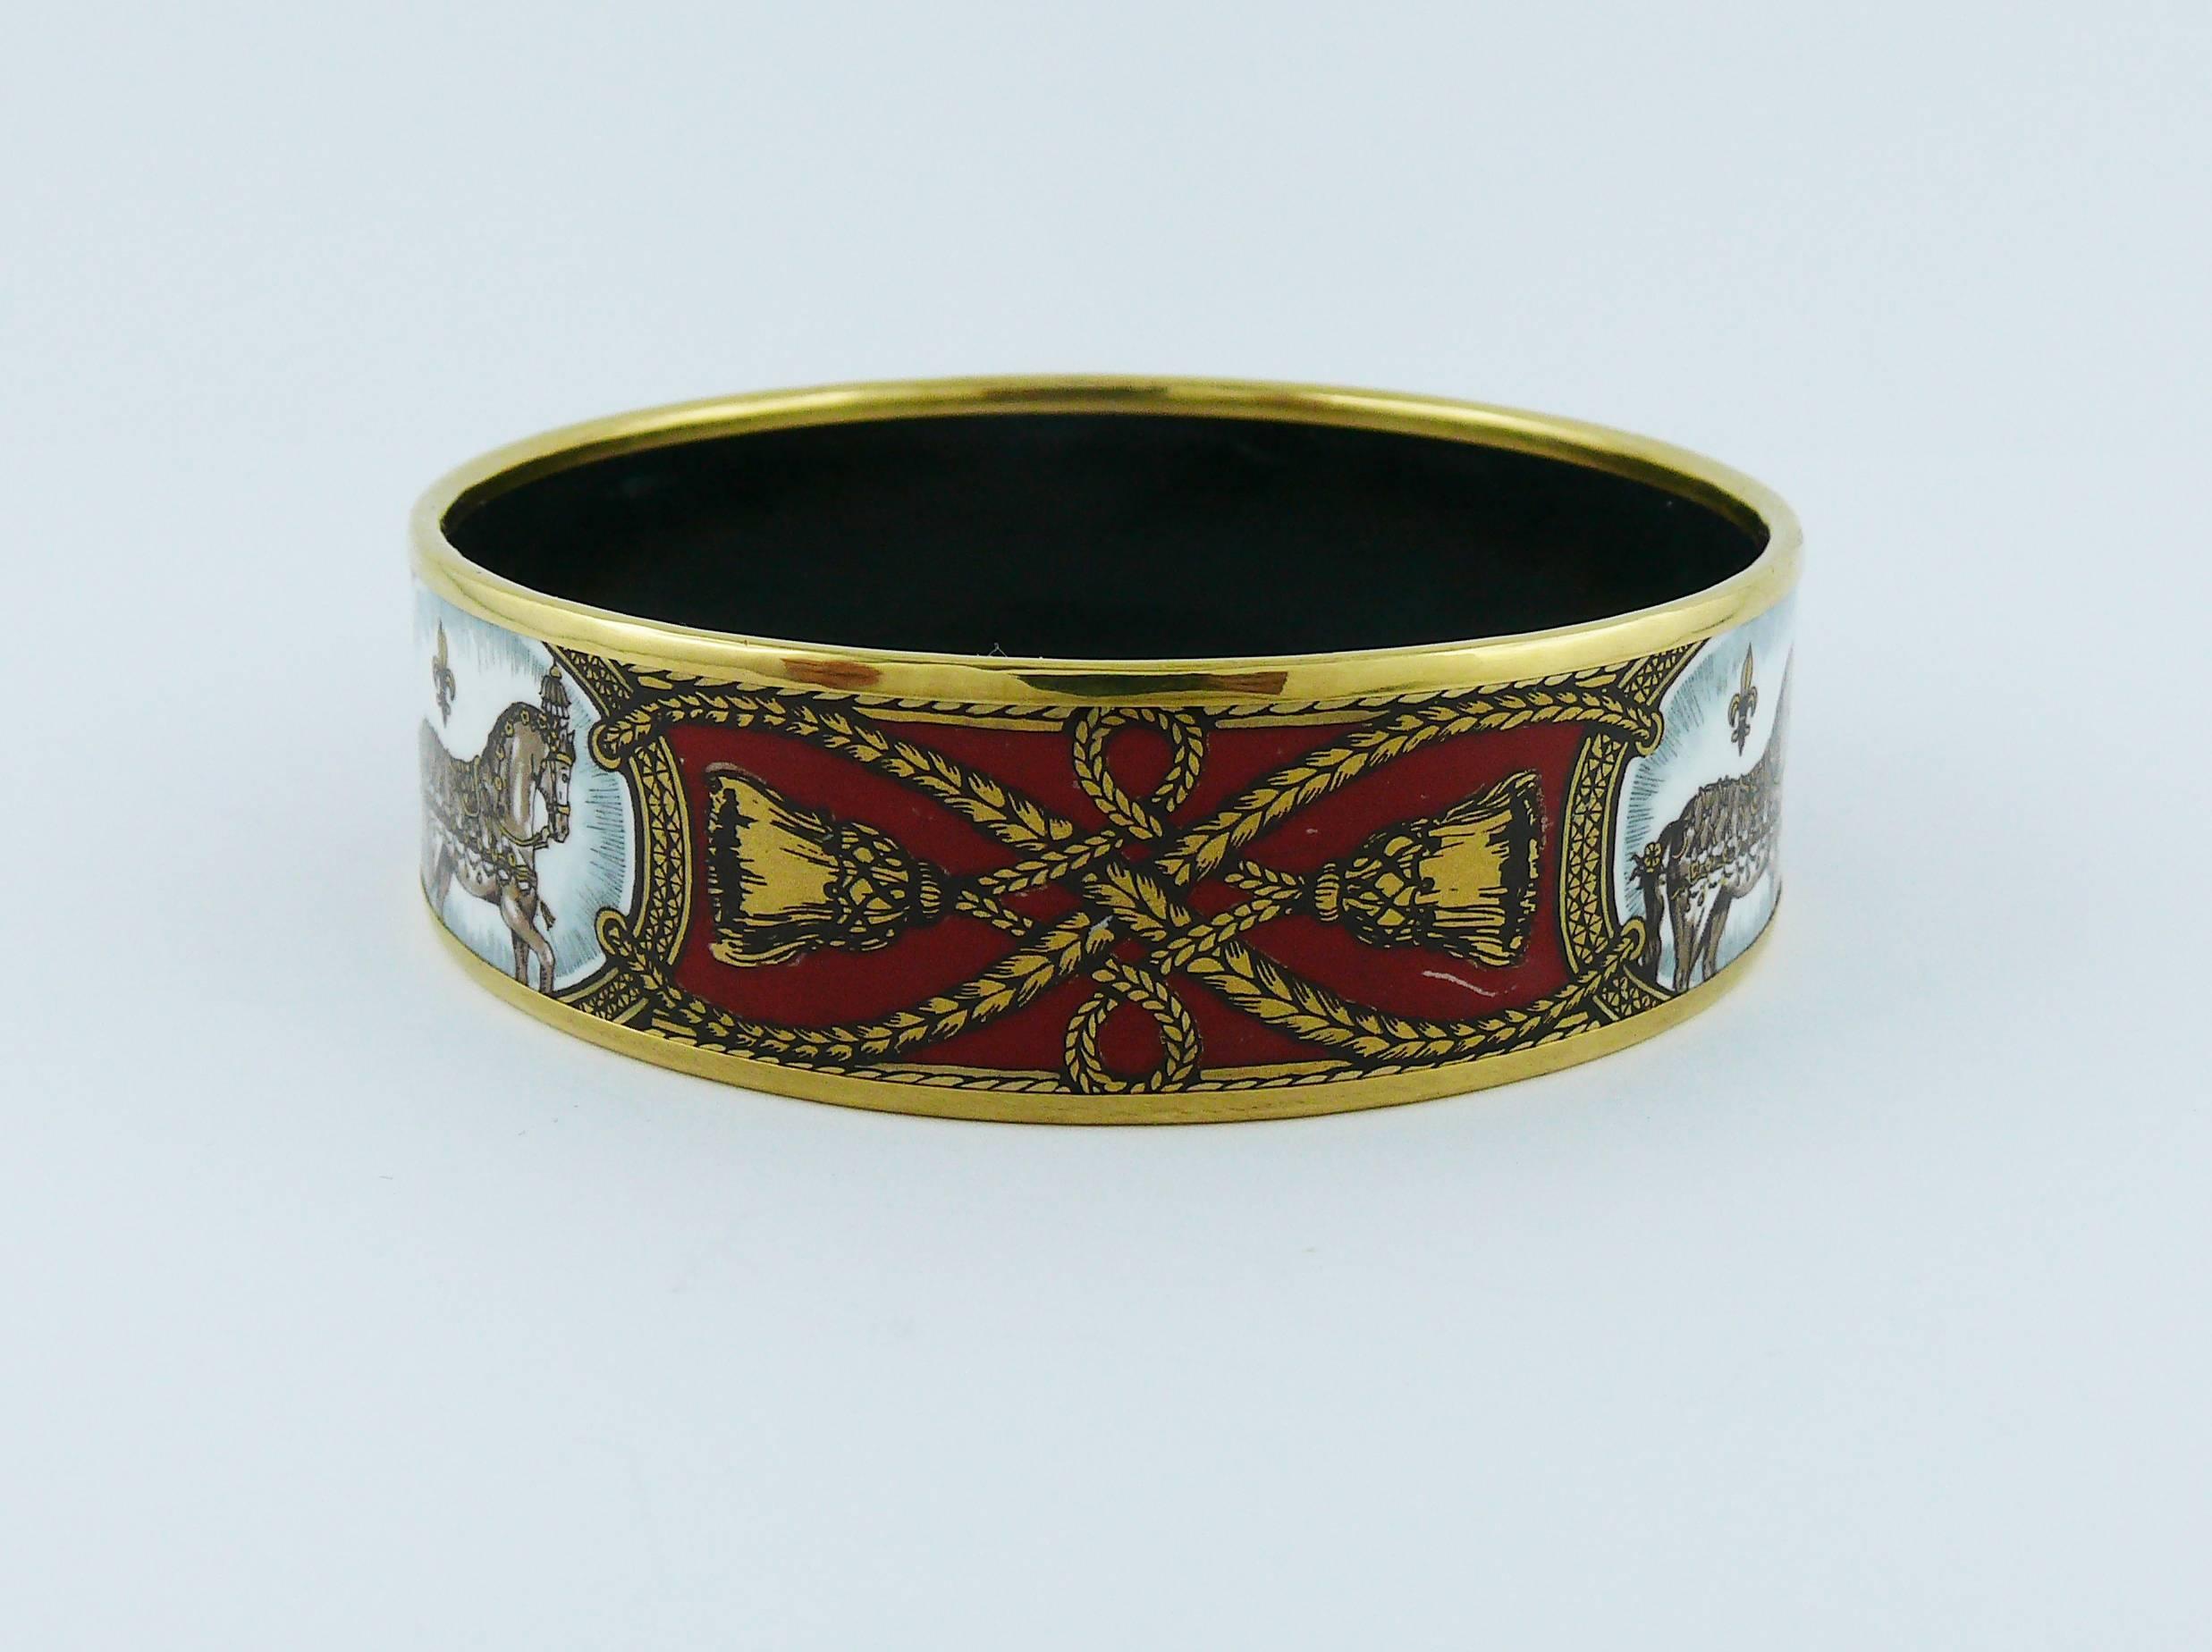 HERMES vintage GRAND APPARAT printed enamel wide cuff bracelet.

Printed enamel horses with gold tone brandebourg and tassel patterns on a red background. Gold plated rim.

Marked HERMES Paris.
Made in Austria.

Indicative measurements : diameter